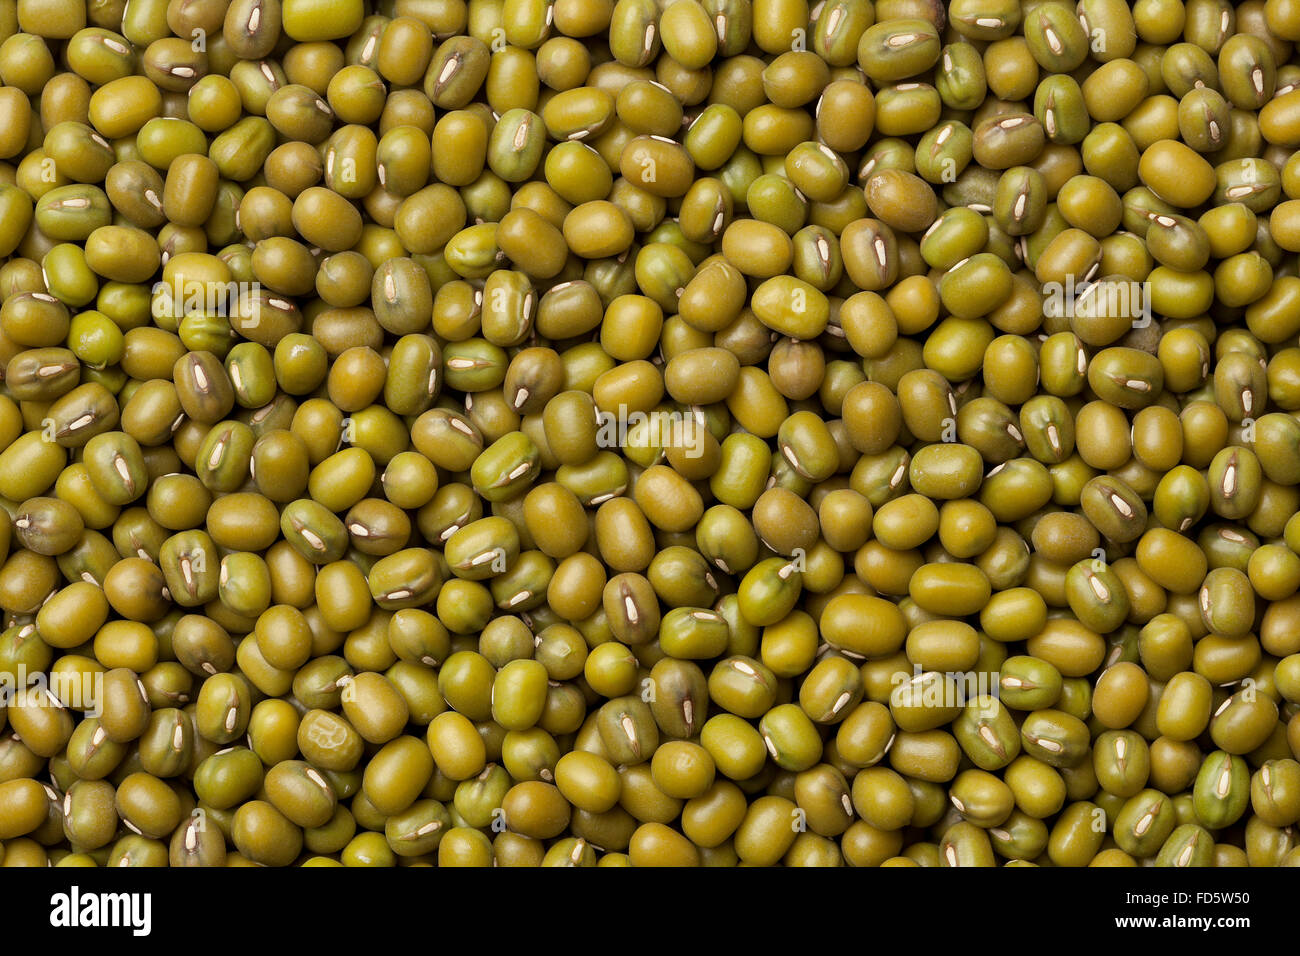 Dried green Mung beans full frame Stock Photo